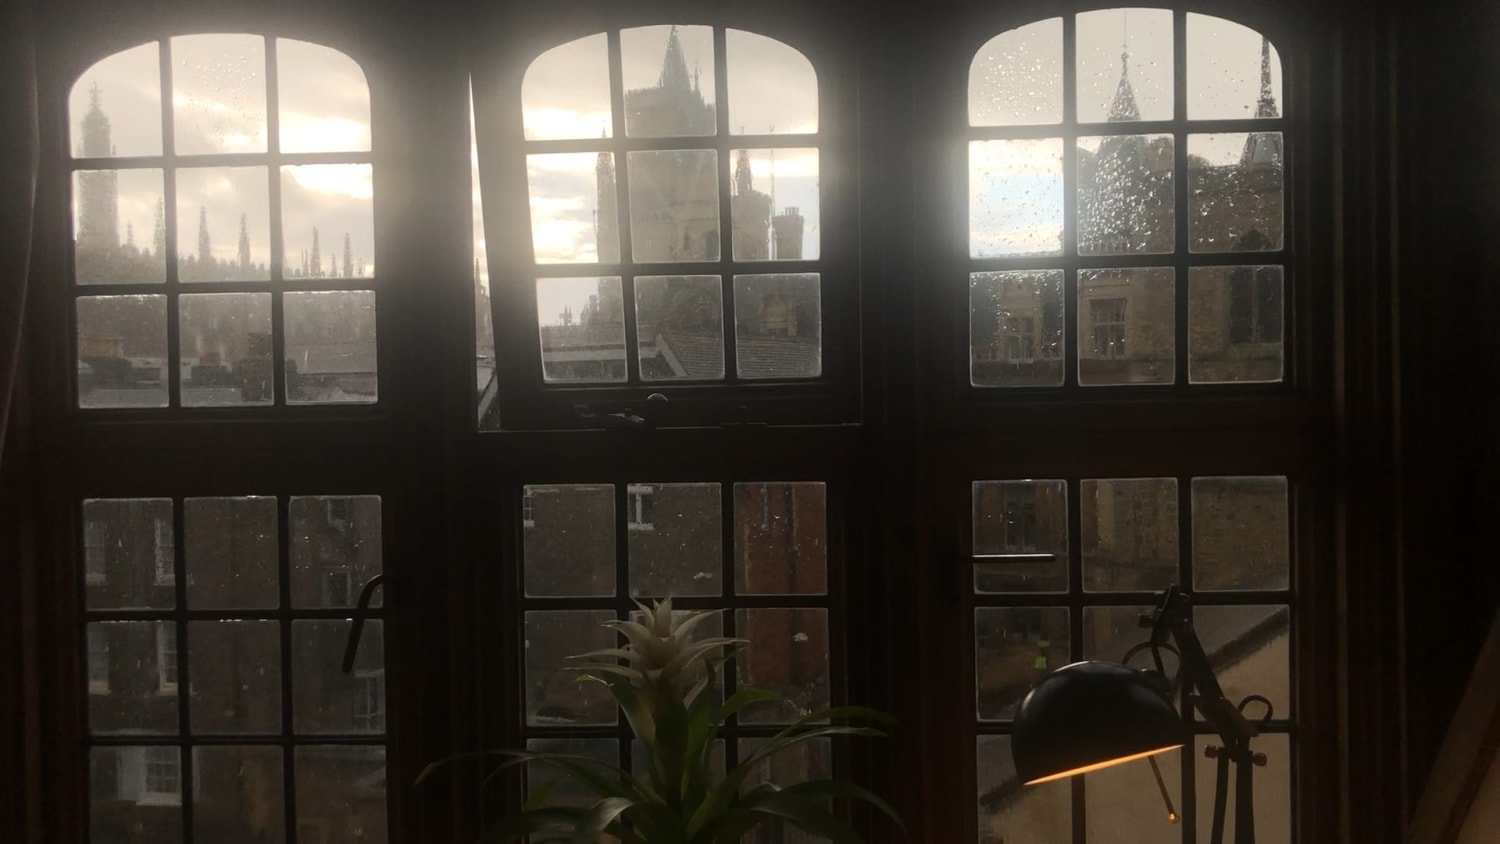 A rainy view from lockdown Cambridge University (day 2 of isolation but the view makes it worthwhile)